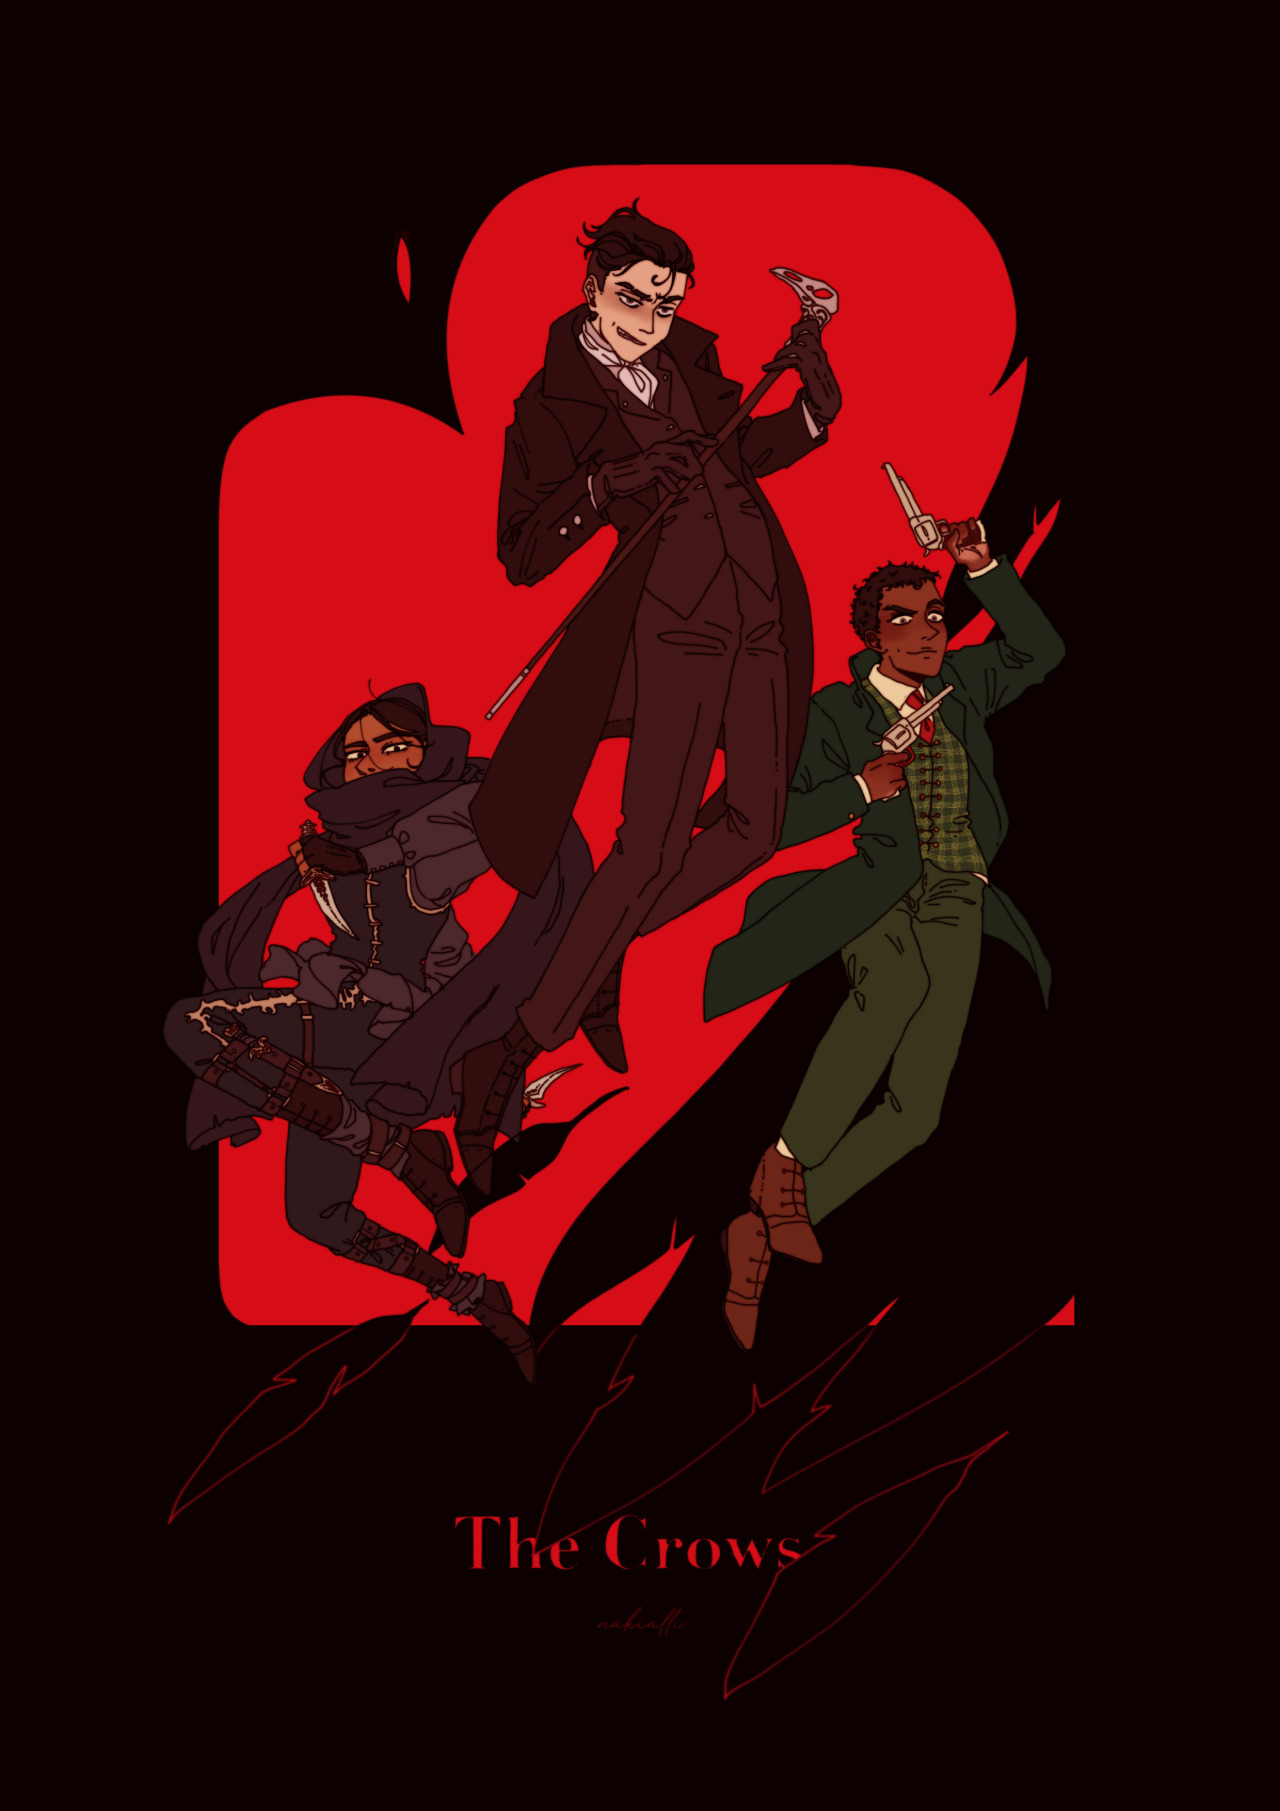 THE CROWS half of them because i’m still sad after crooked kingdom so i pretend i’ve only watched the showget your print here!! but with white bg cause i’m scared to have this much black in a print it usually bleeds and looks shittyyyy #shadow and bone  #six of crows #crooked kingdom#Kaz Brekker#inej ghafa#jesper fahey#kaz#inej#jesper#crows #shadow and bone netflix  #inej my queen  #you should have been in the center  #i promise i;ll draw you with your fleet  #kaz my trash boy supreme  #JESPER MY SON #leigh bardugo#my art#soc#soc fanart